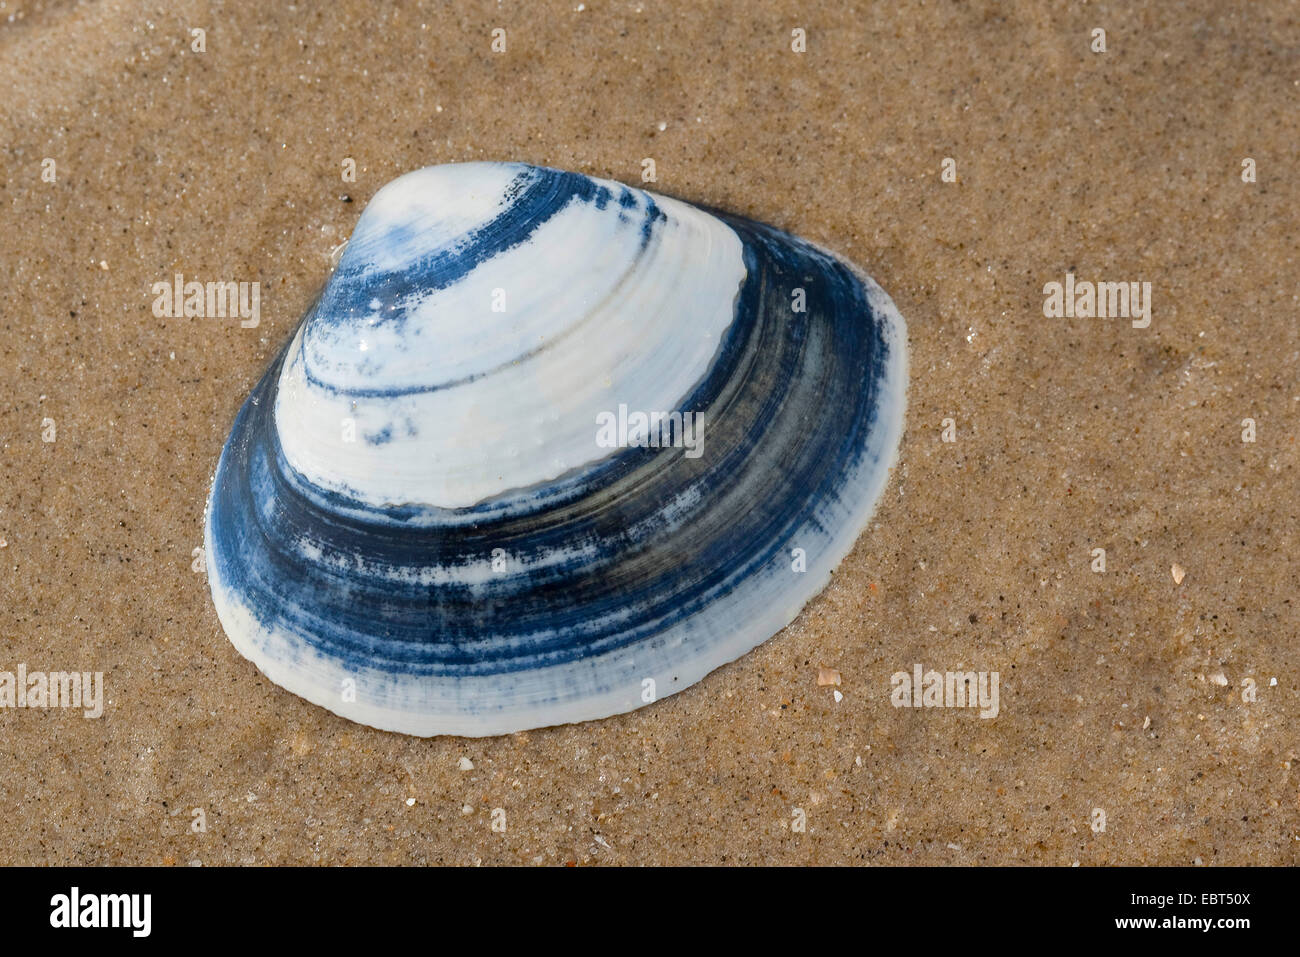 Thick surfclam, Tthick trough shell (Spisula solida), shell on the beach, Germany Stock Photo